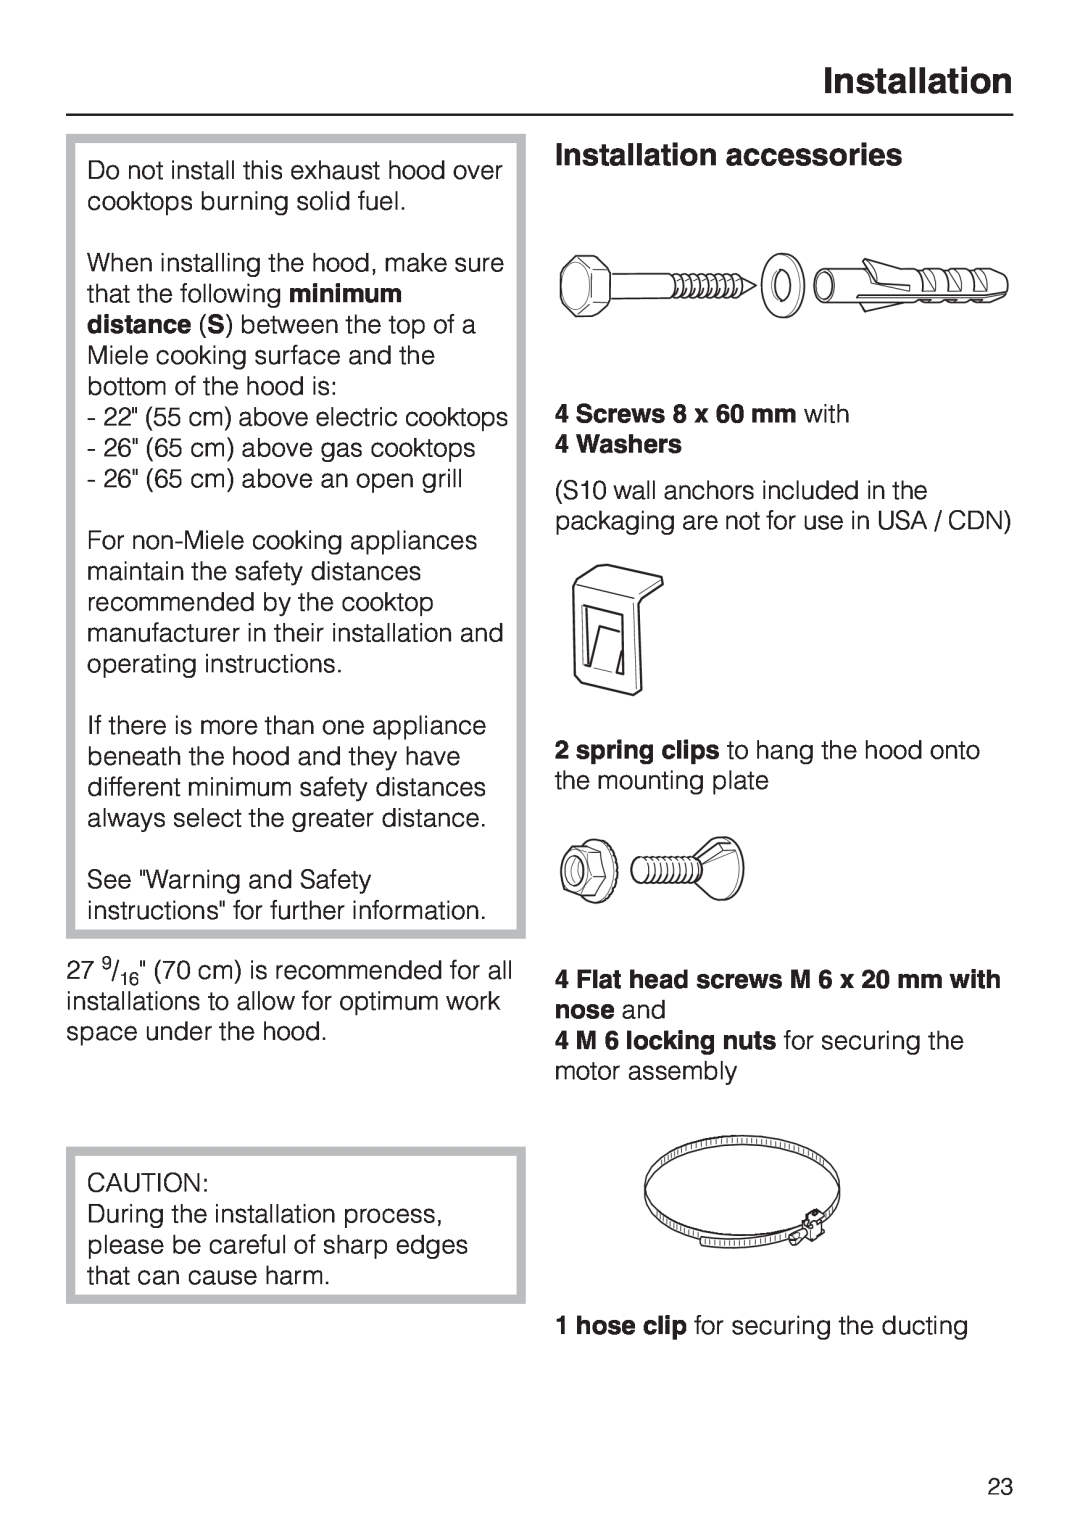 Miele DA220-3 Installation accessories, Screws 8 x 60 mm with 4 Washers, Flat head screws M 6 x 20 mm with nose and 